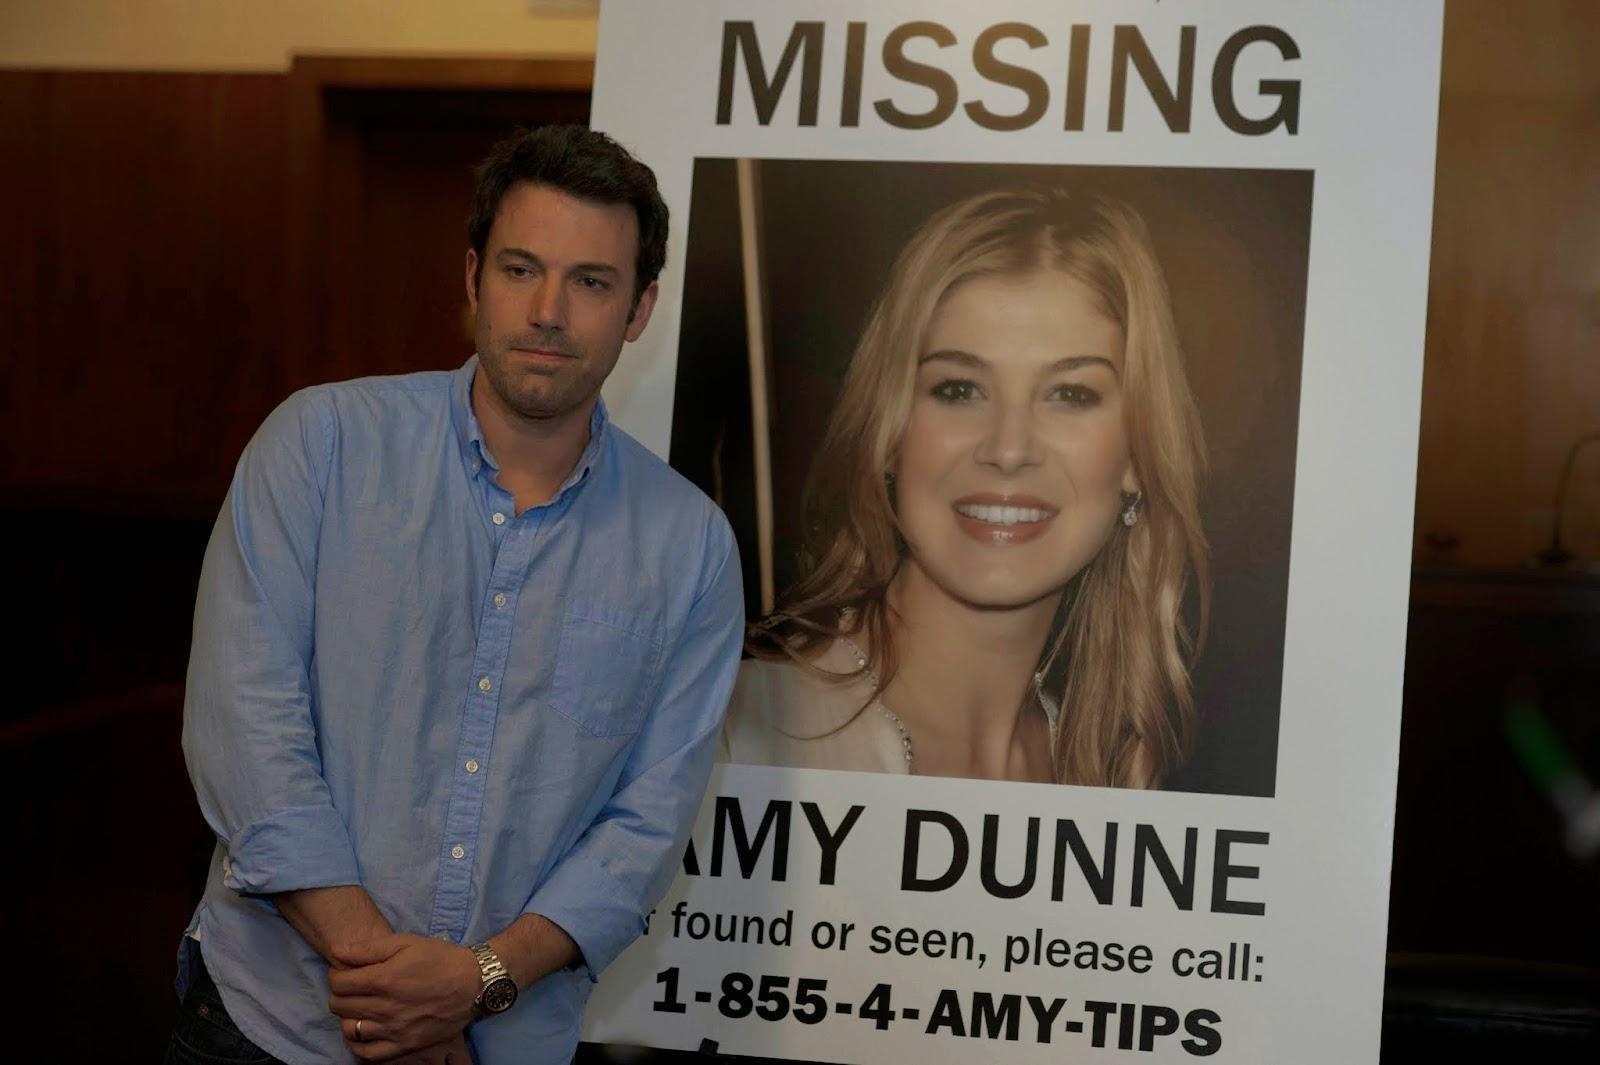 &#13;
Ben Affleck stars in the adaptation of Gillian Flynn's novel ‘Gone Girl’, about a woman who disappears to try and pin her murder on her husband &#13;